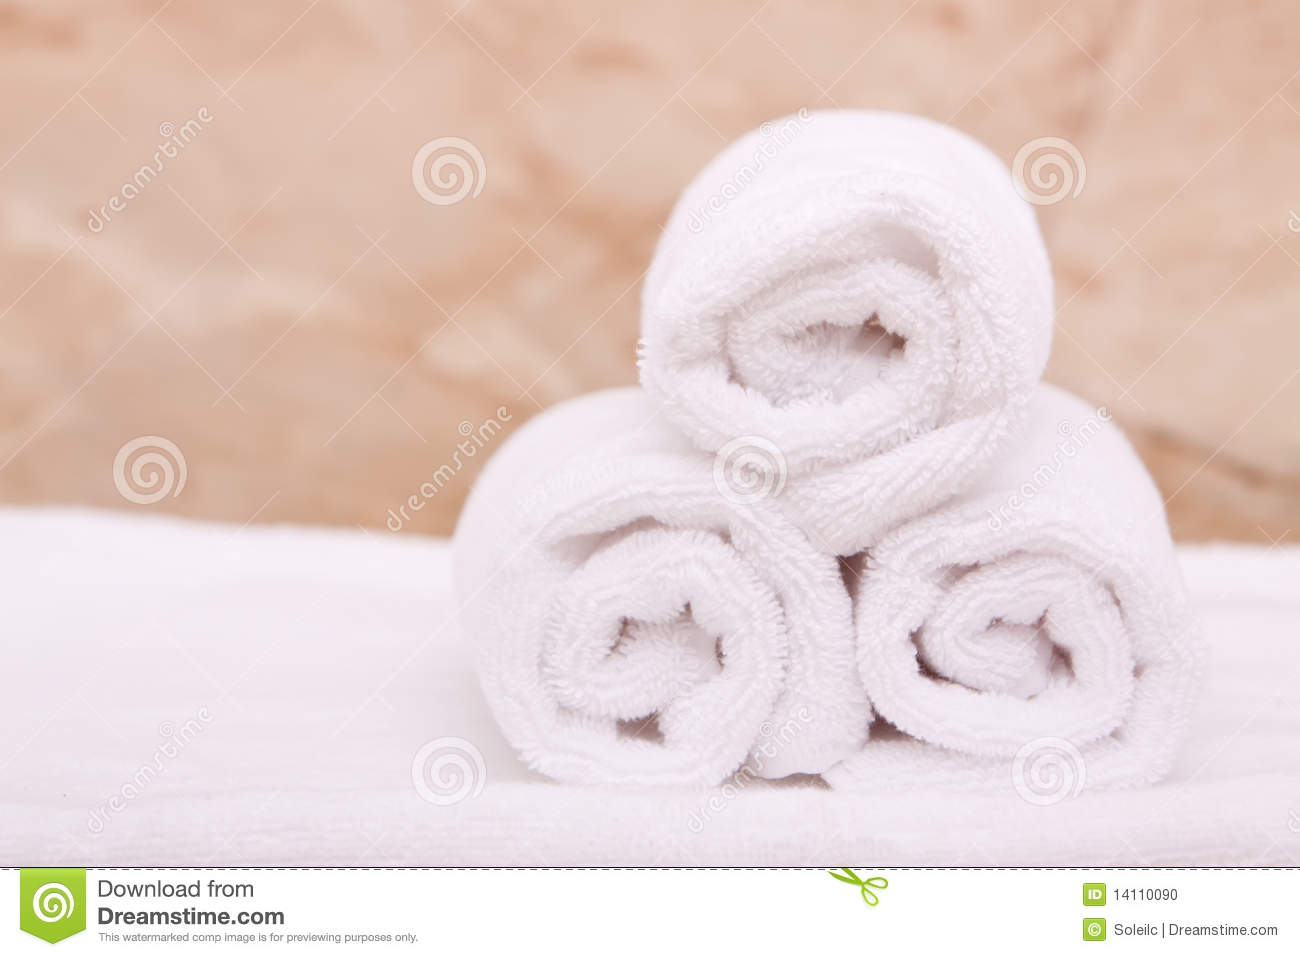 Rolled Up Bath Towels Stock Photo   Image  14110090